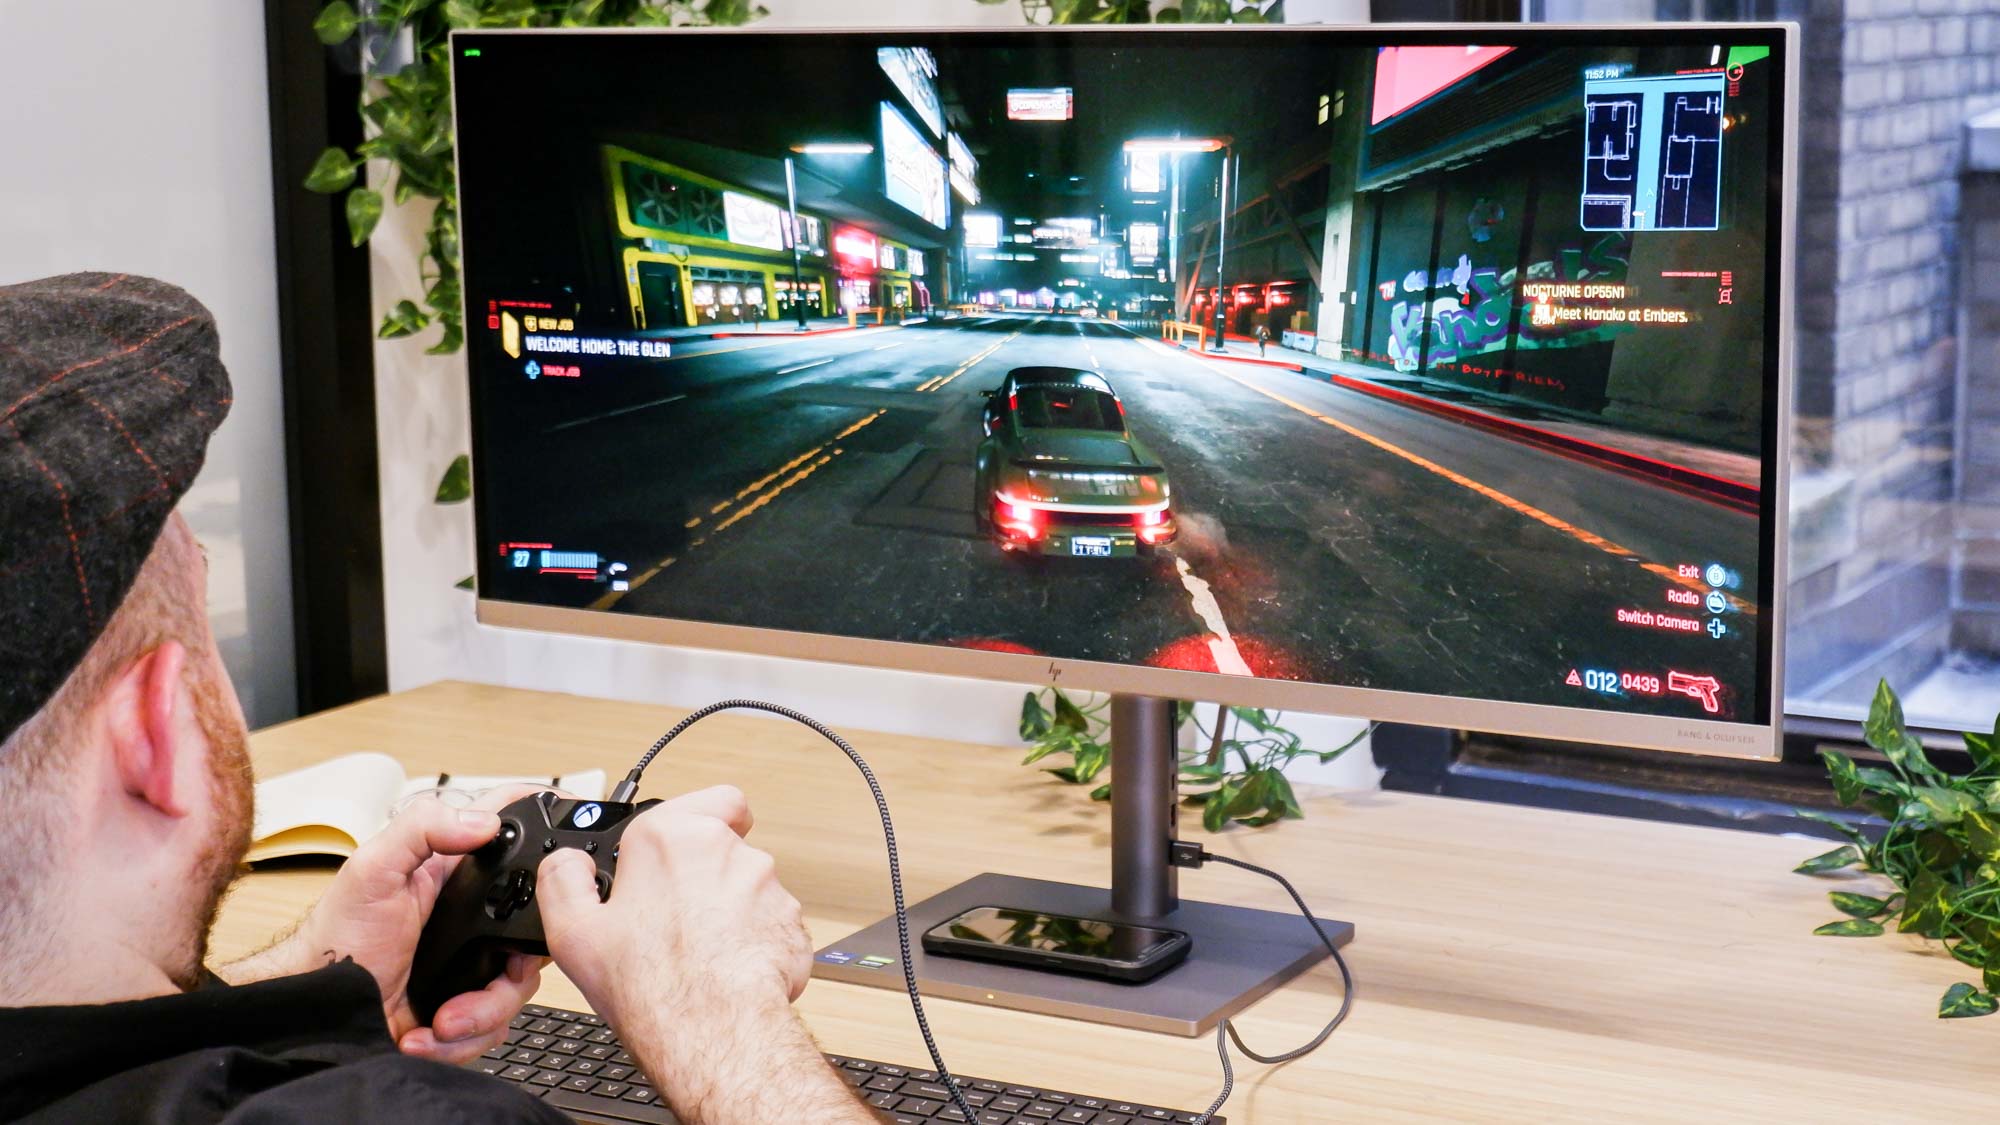 Games run great thanks to the HP Envy 34's RTX 3060 laptop GPU.